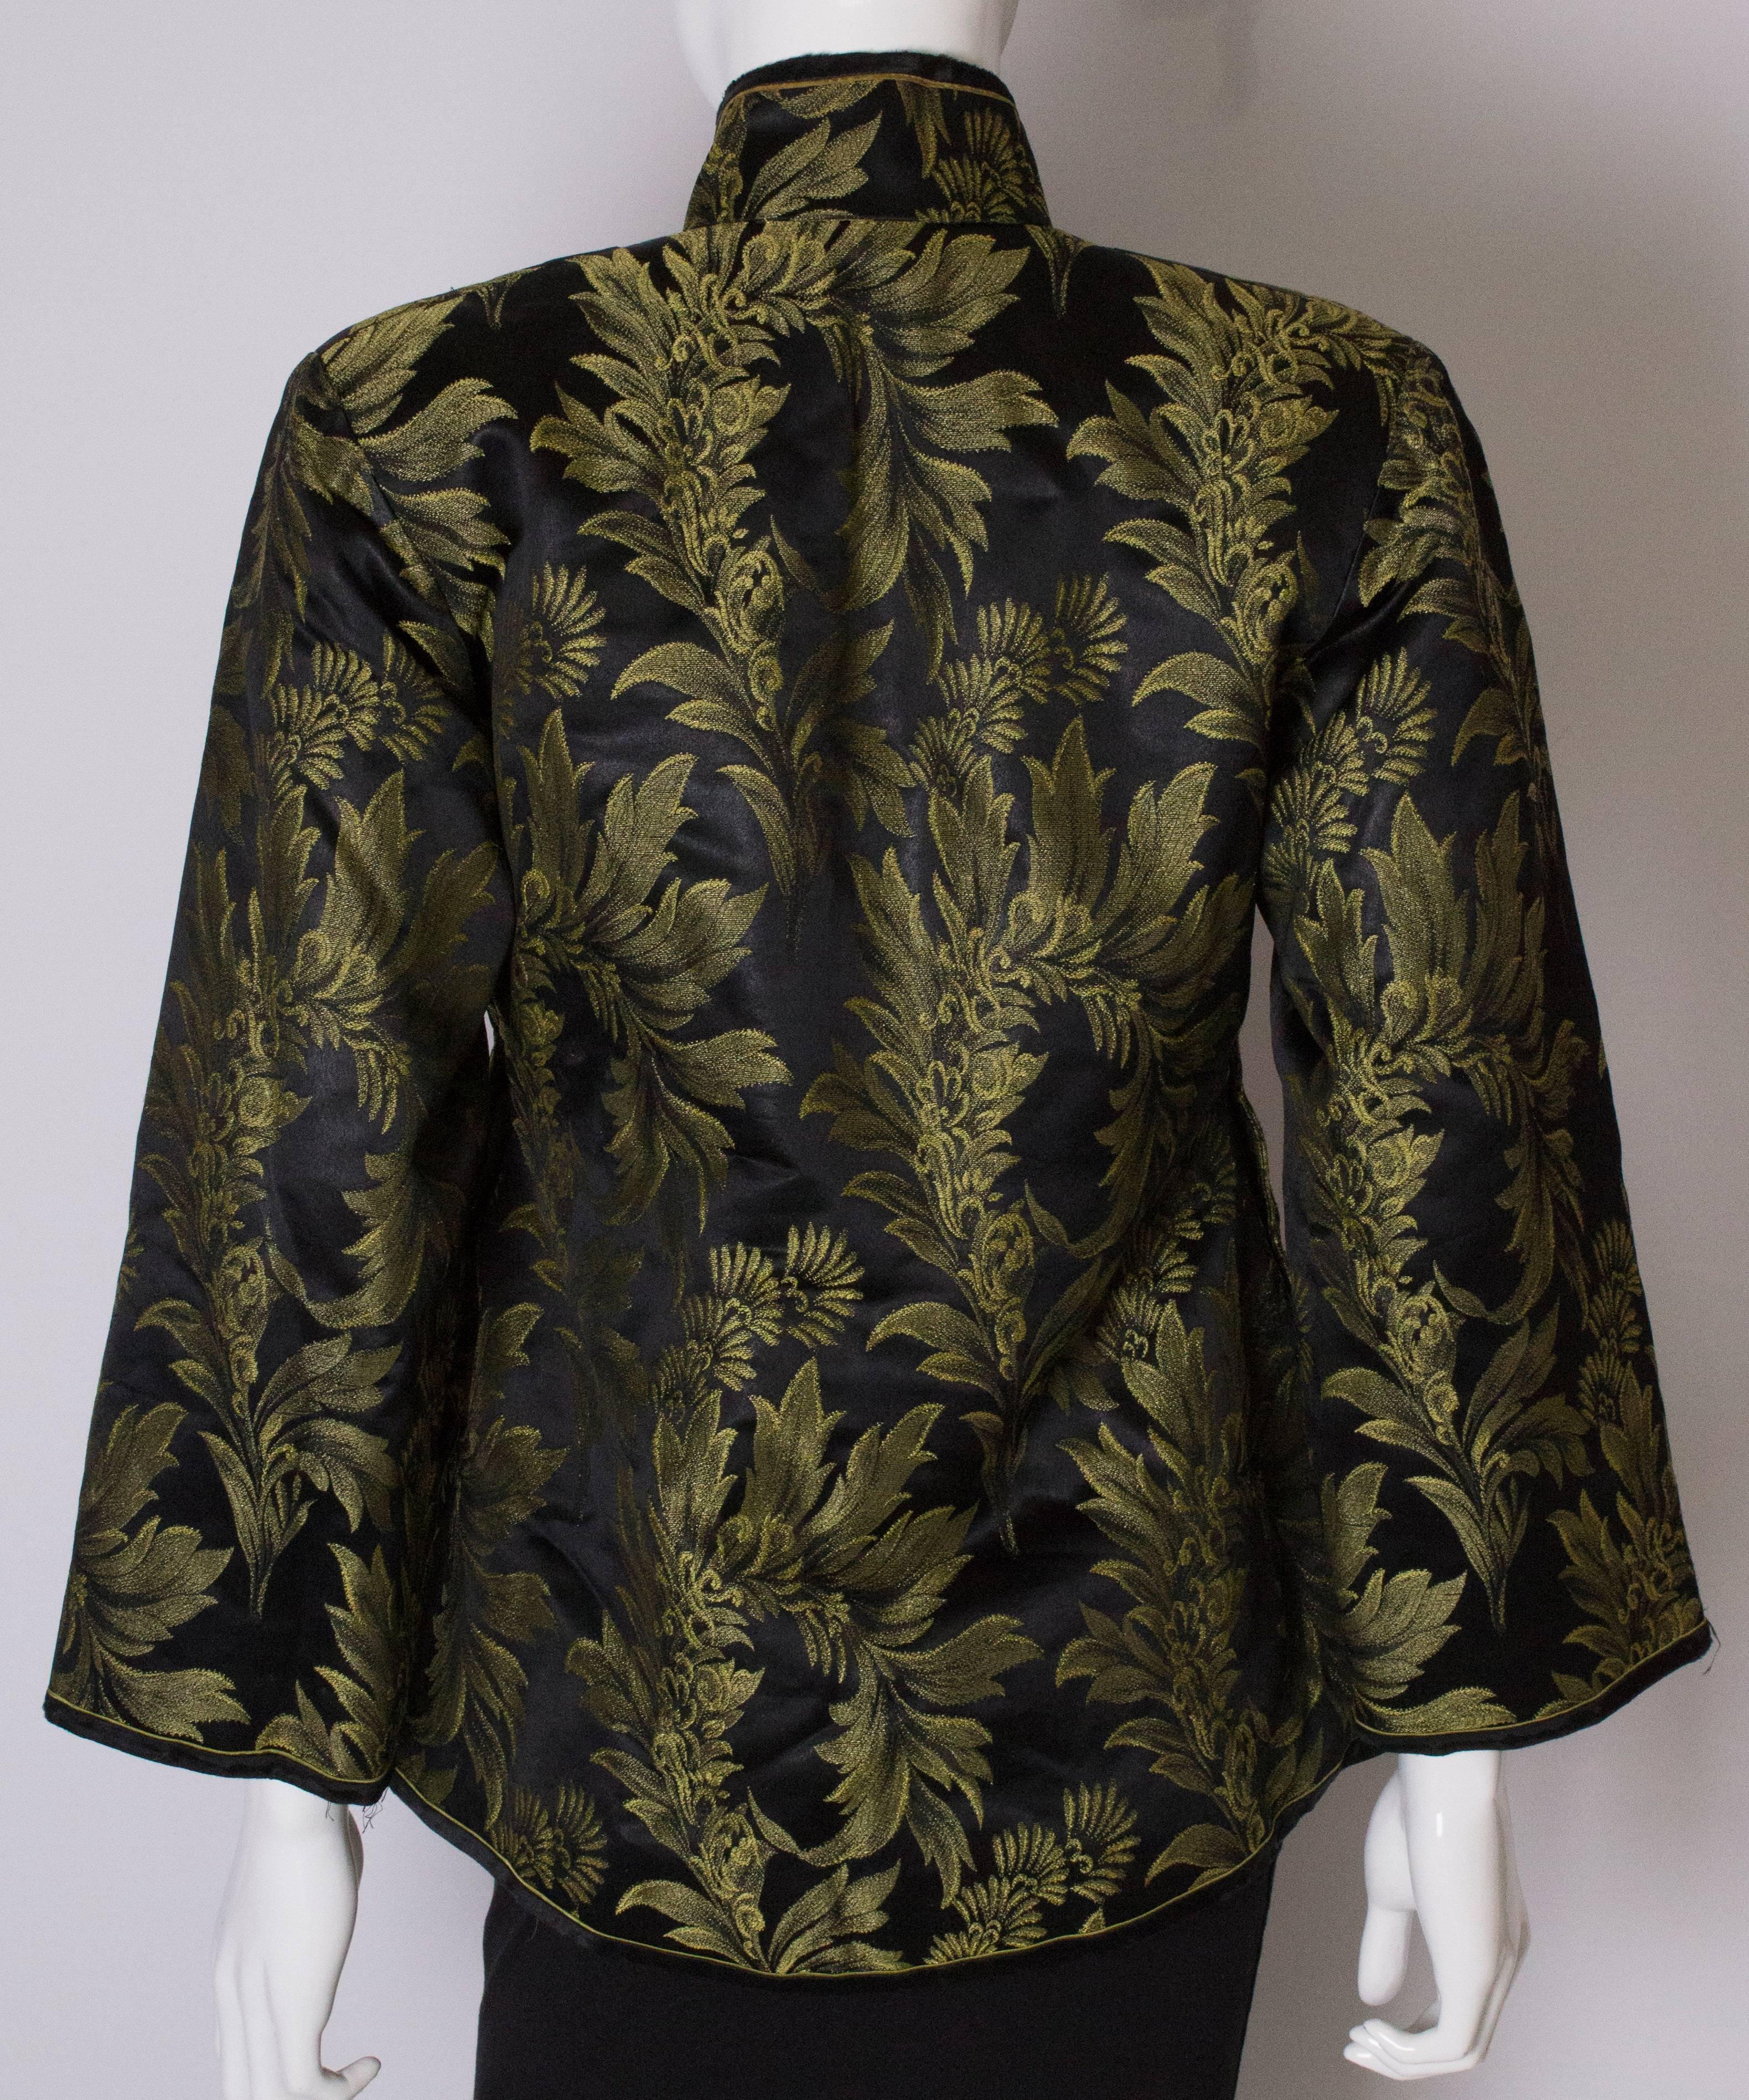 Women's A Vintage 1980s embroidered Chinese jacket with fur lining.